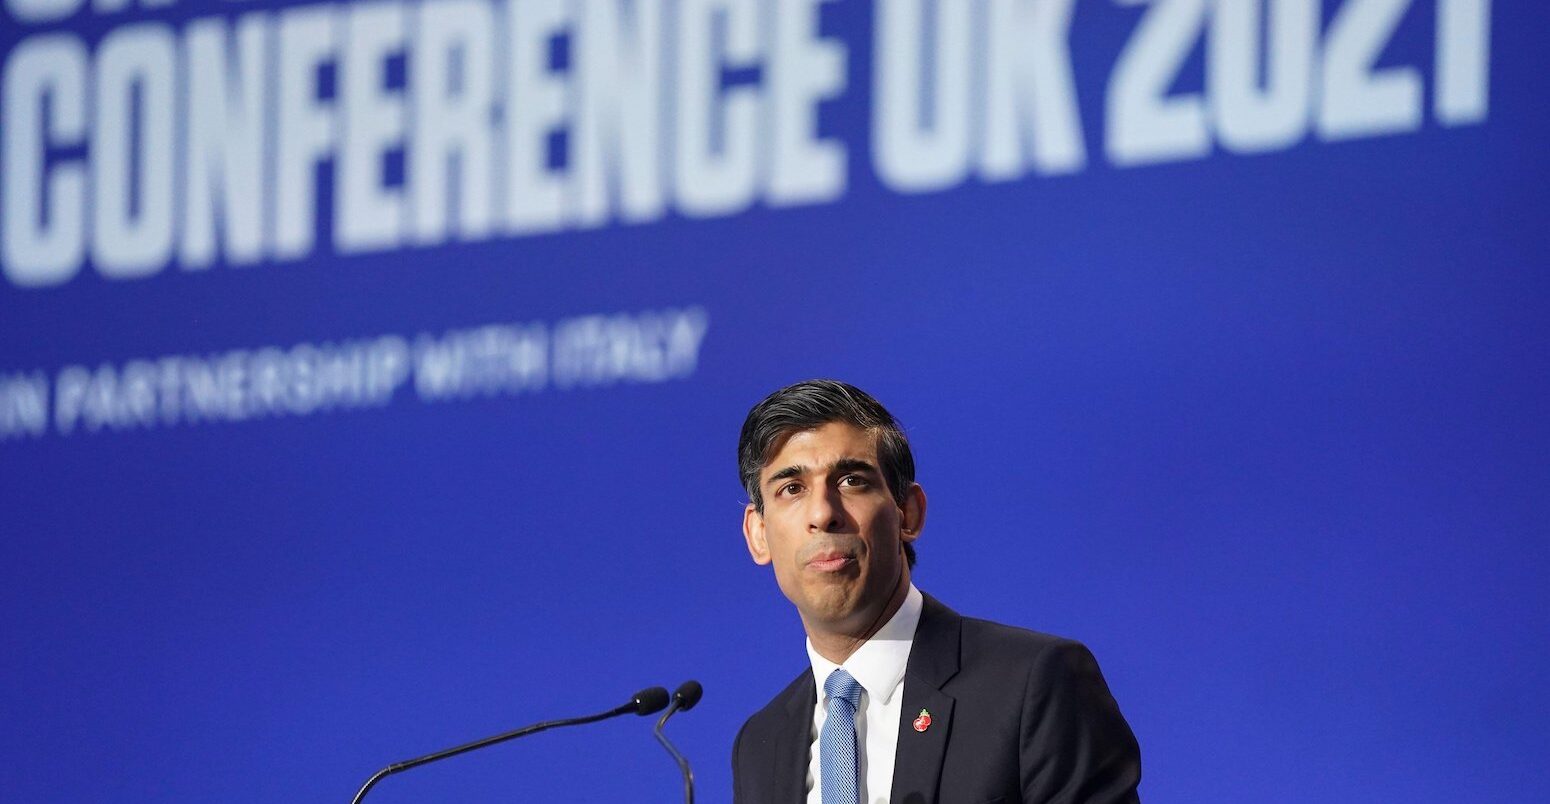 Chancellor Rishi Sunak speaking at the COP26 summit in Glasgow. Image ID: 2H4HKWB.